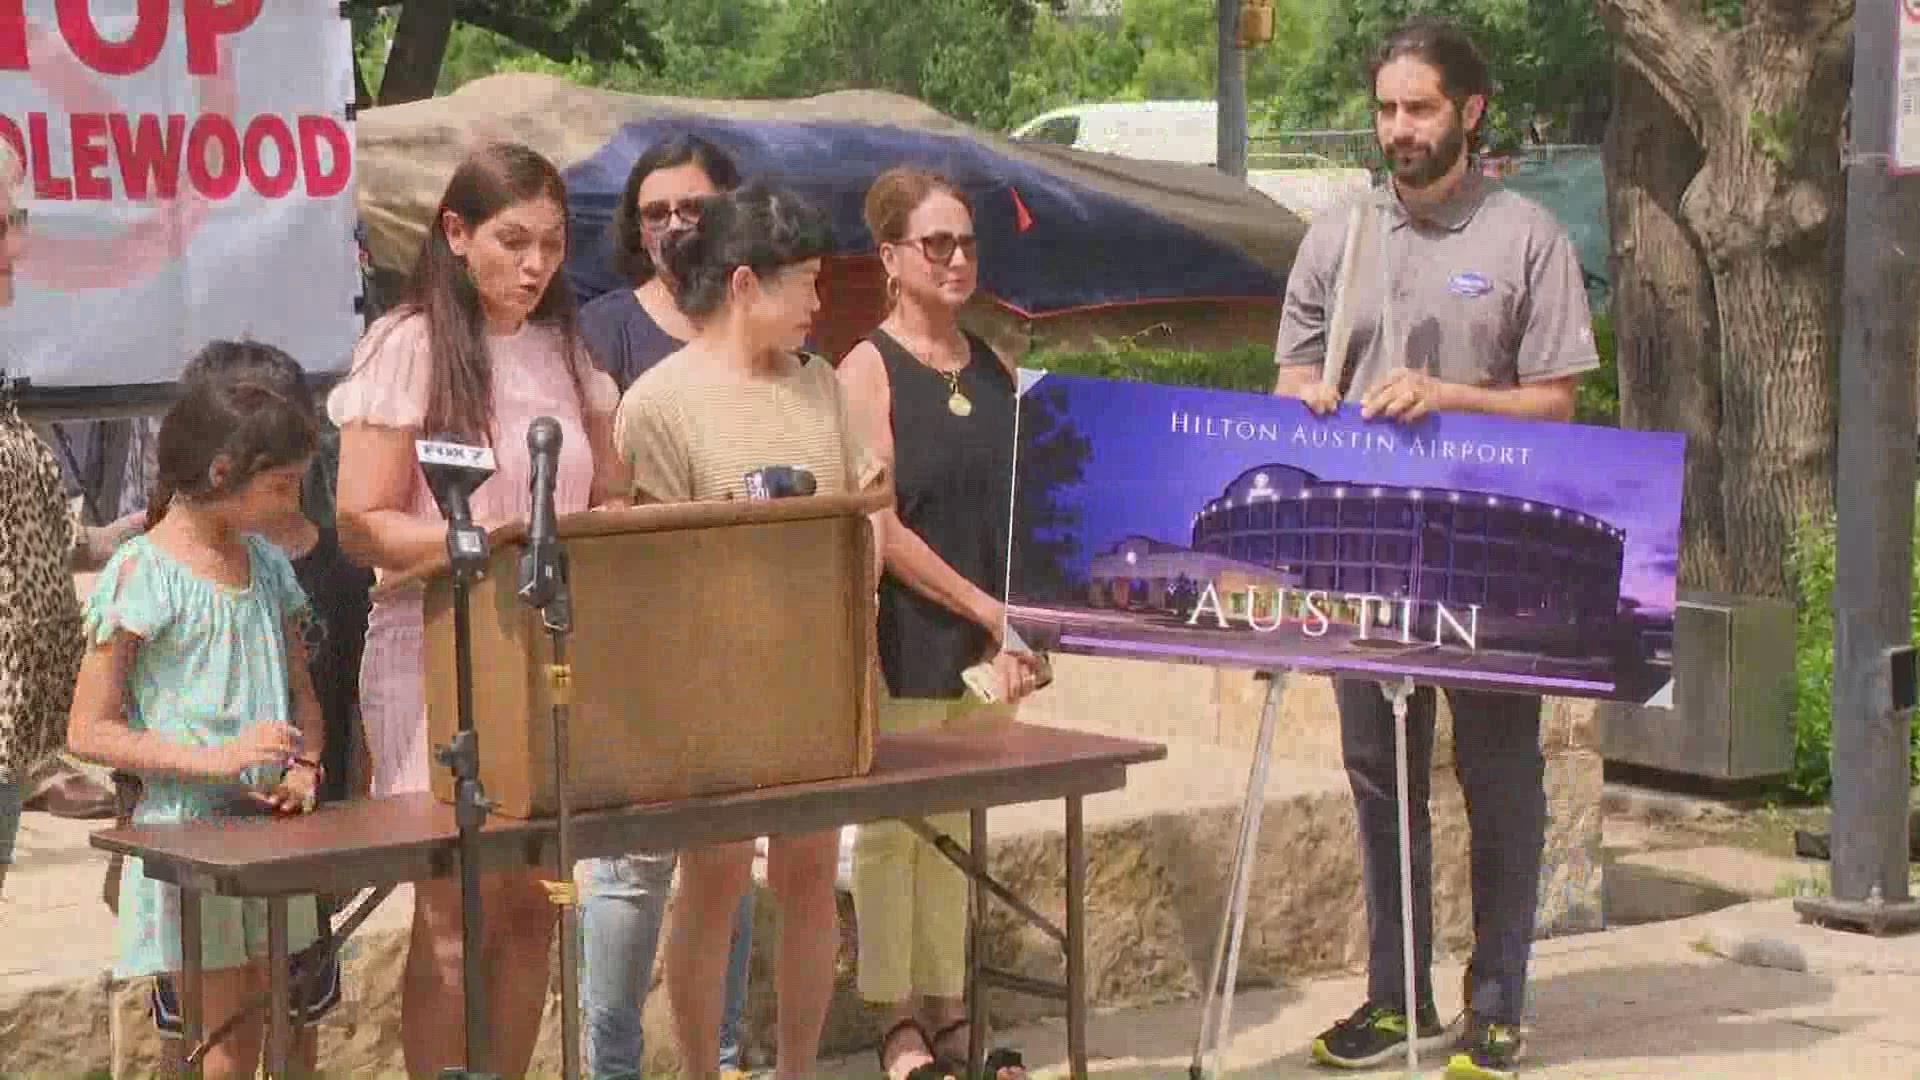 A group that's trying to stop the City of Austin from using Candlewood Suites hotel as housing for the homeless announced a different hotel as an alternative option.